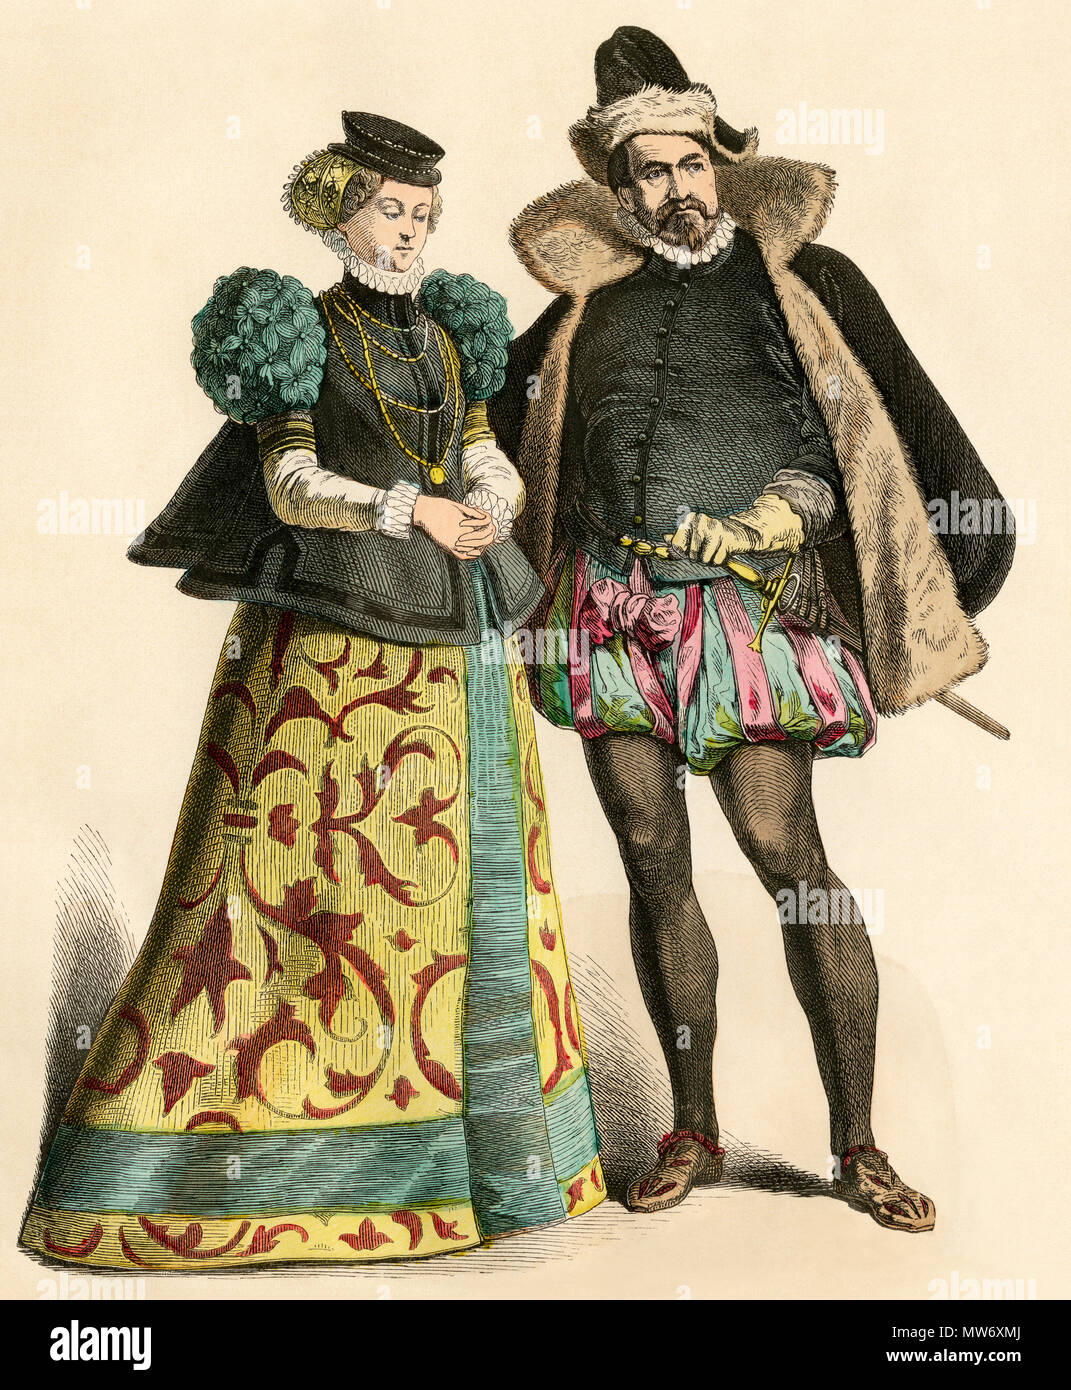 German couple of the nobility, late 1500s. Hand-colored print Stock Photo